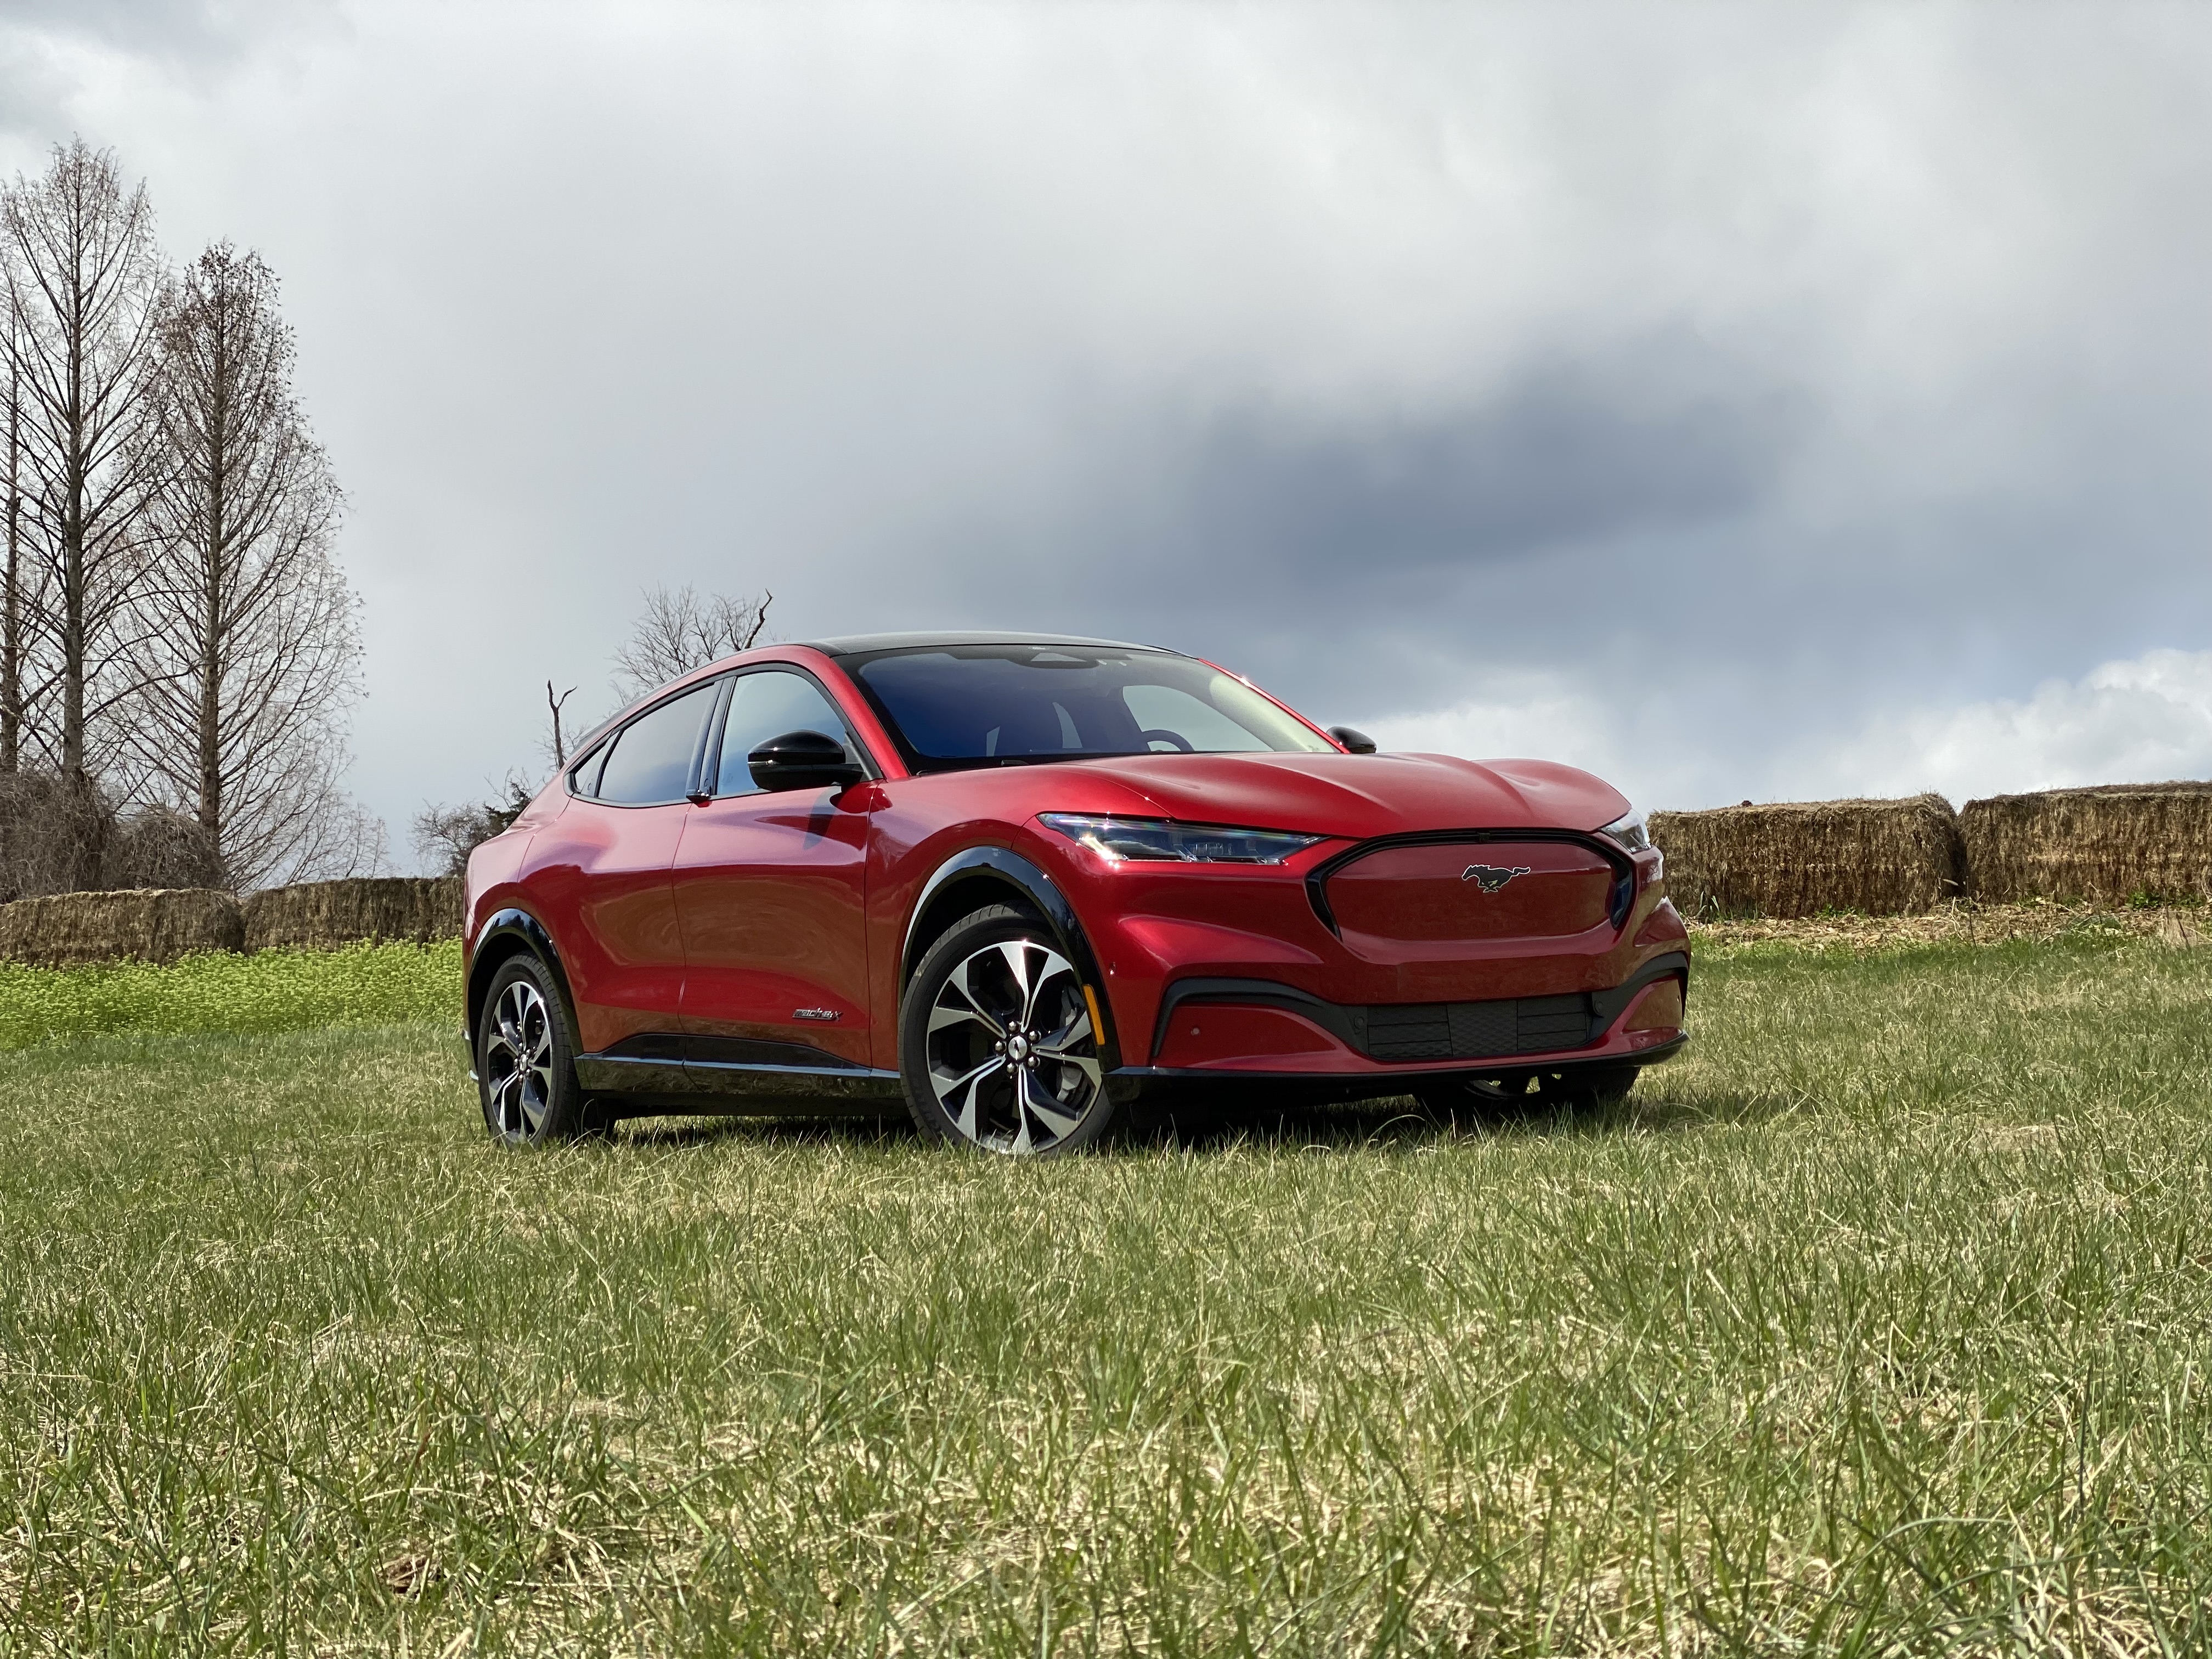 2021 Ford Mustang Mach-E from the front passenger side in a grassy field with dark clouds in the back.